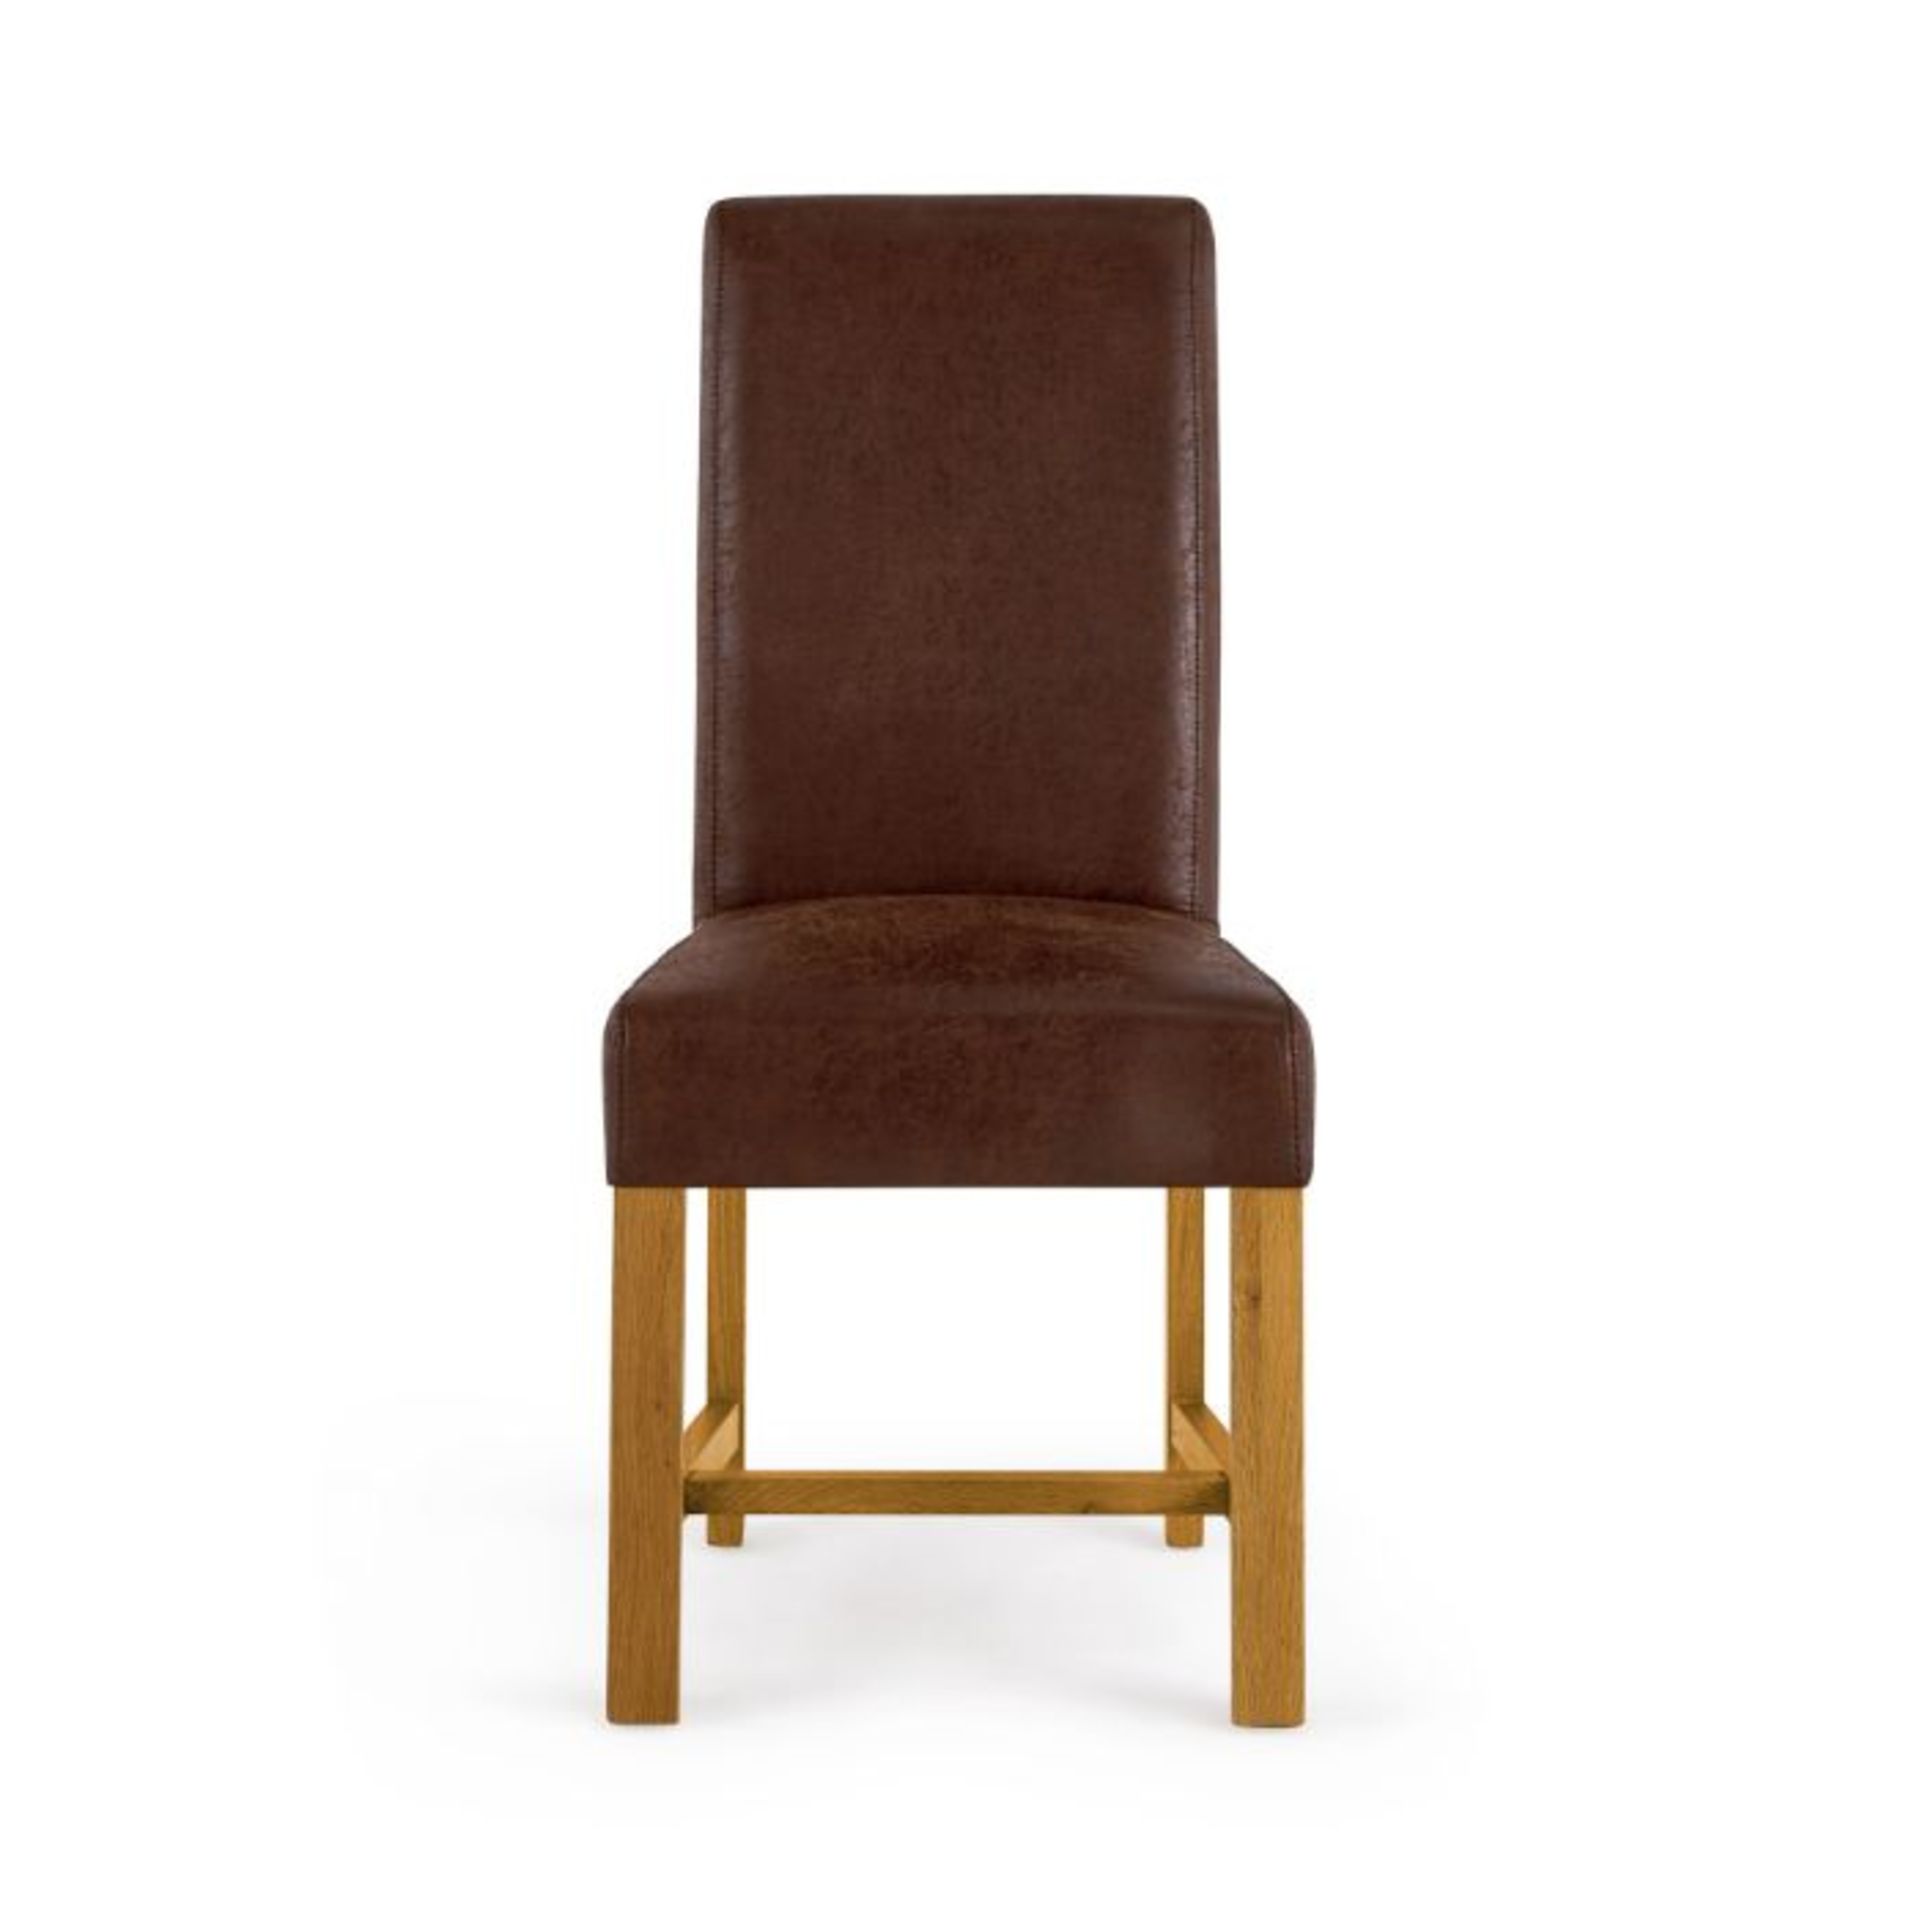 Oak Furnitureland Scroll Back Chair in Antiqued Brown Fabric with Solid Oak Legs RRP £380.00